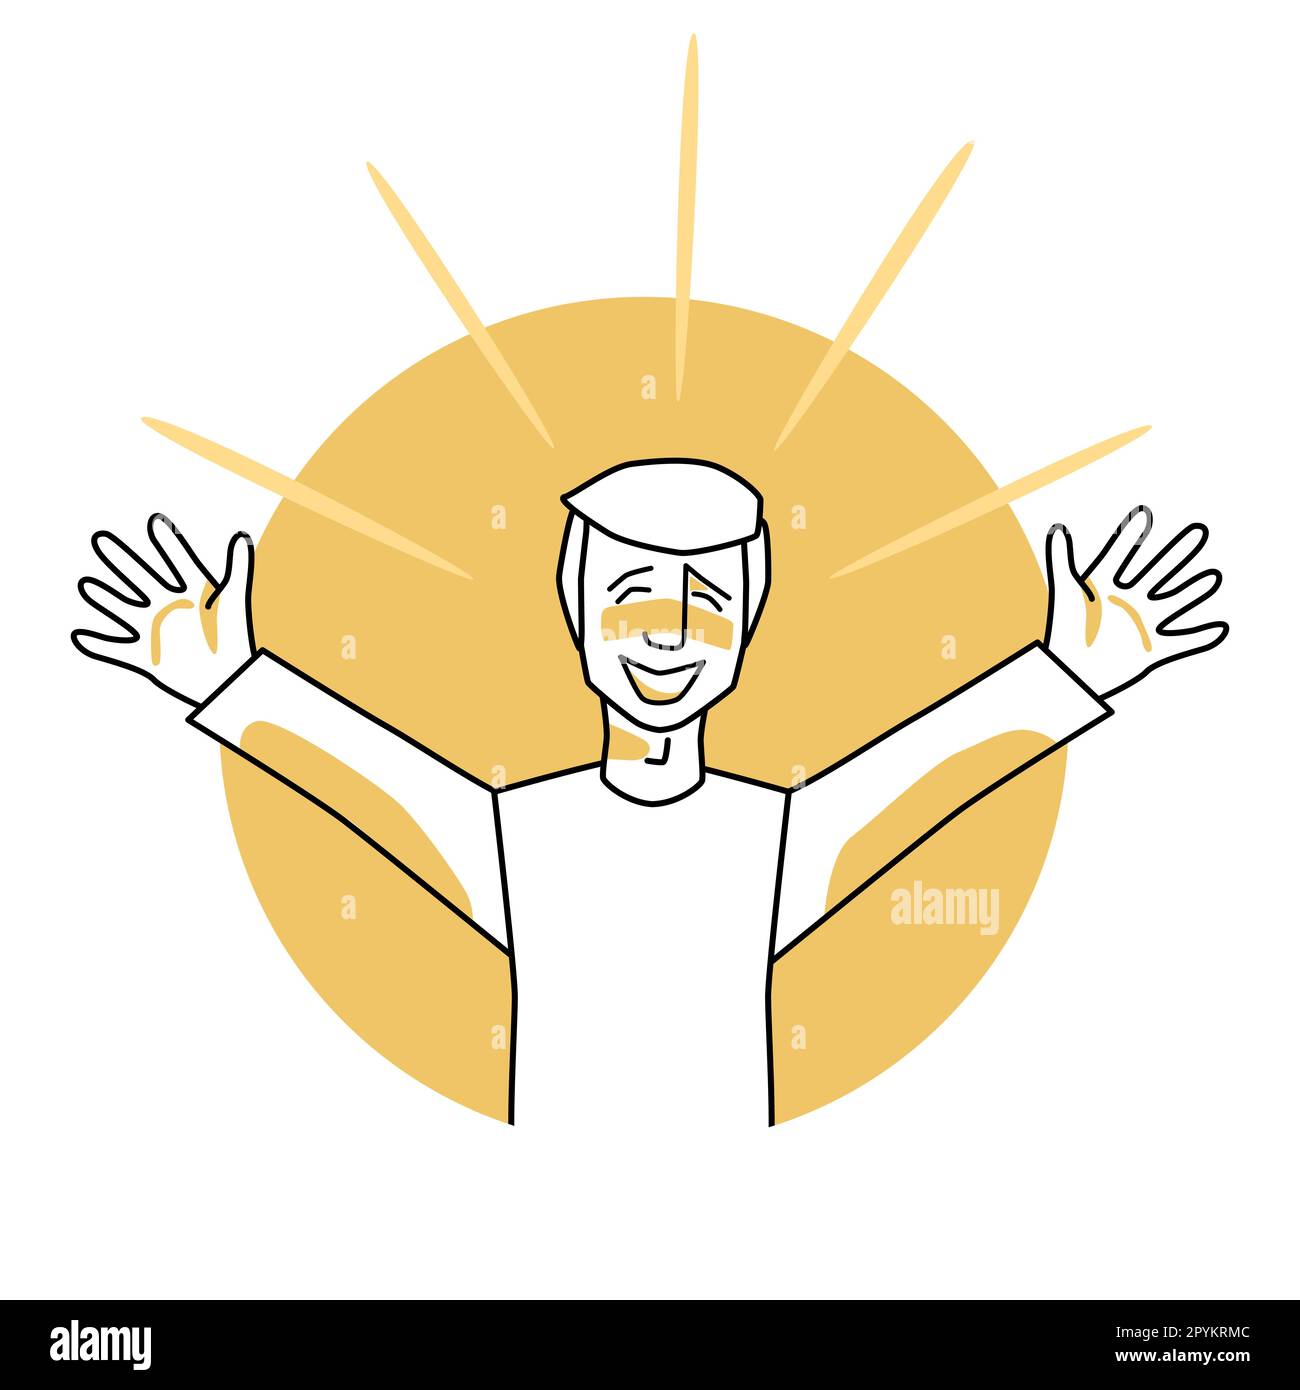 Happy man, emotion of happiness, facial expression with gestures. Joyful male with white hair, expressing his happy feelings. Yellow vector circle ico Stock Vector